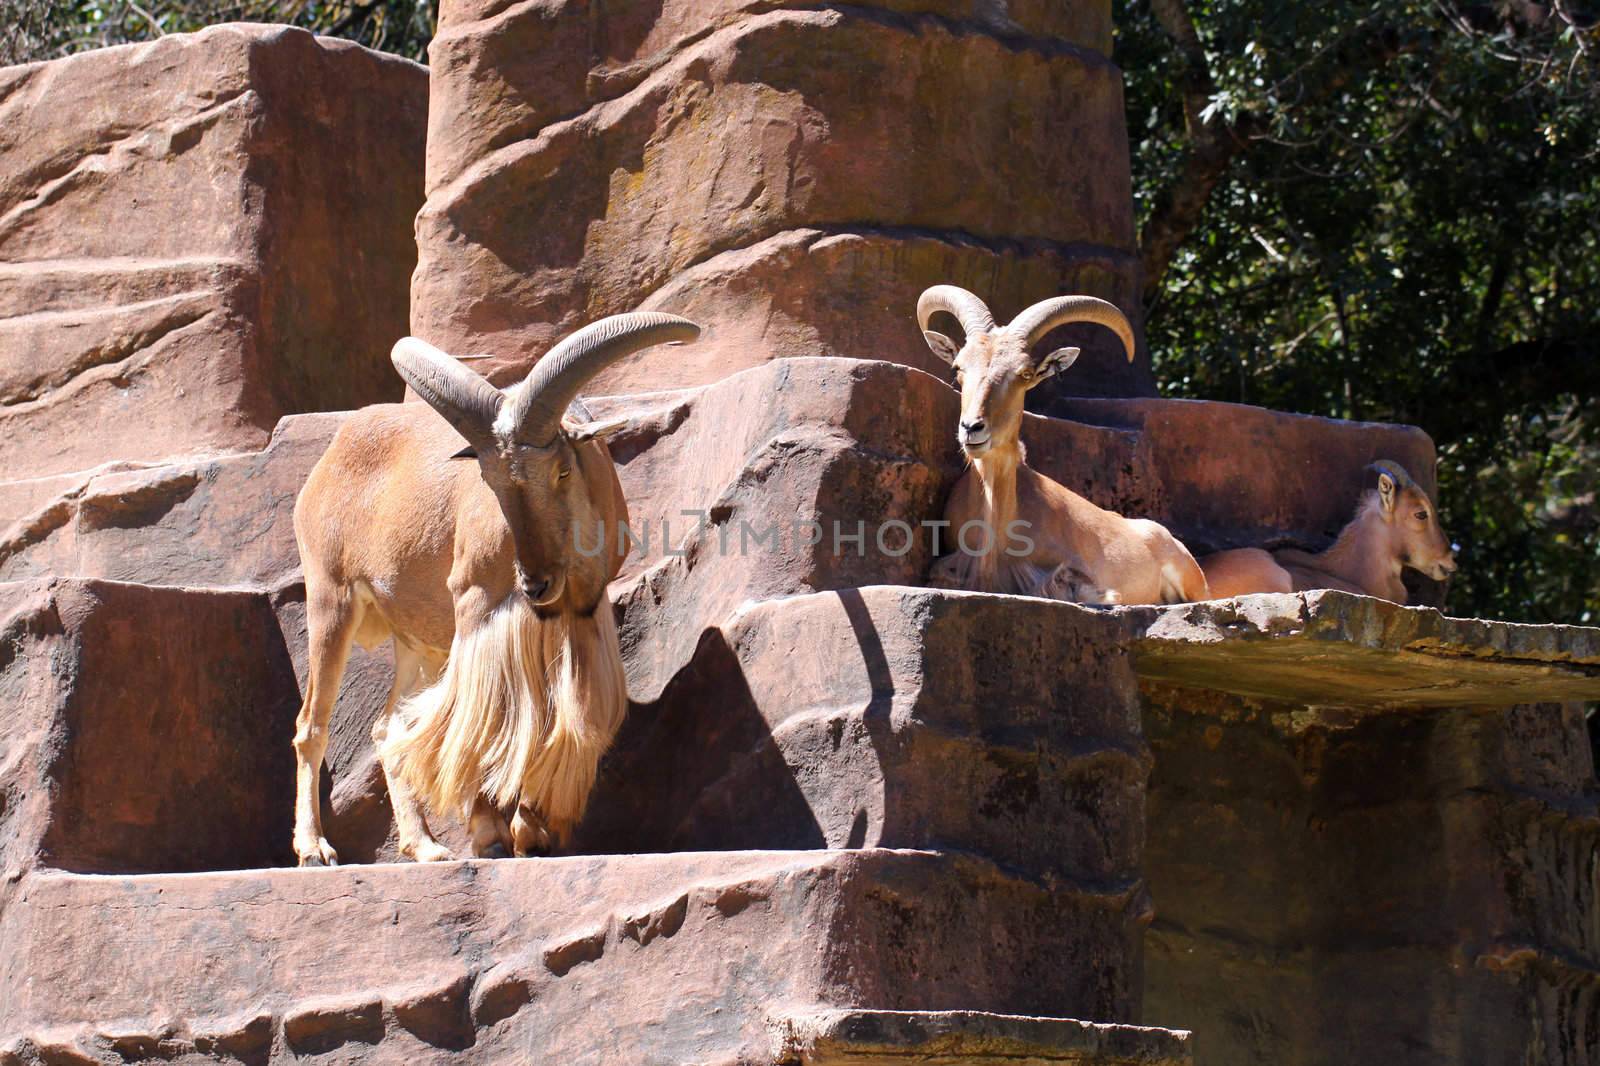 Three Barbary Sheep - Ammotragus lervia - One Male Standing and Two Females Resting